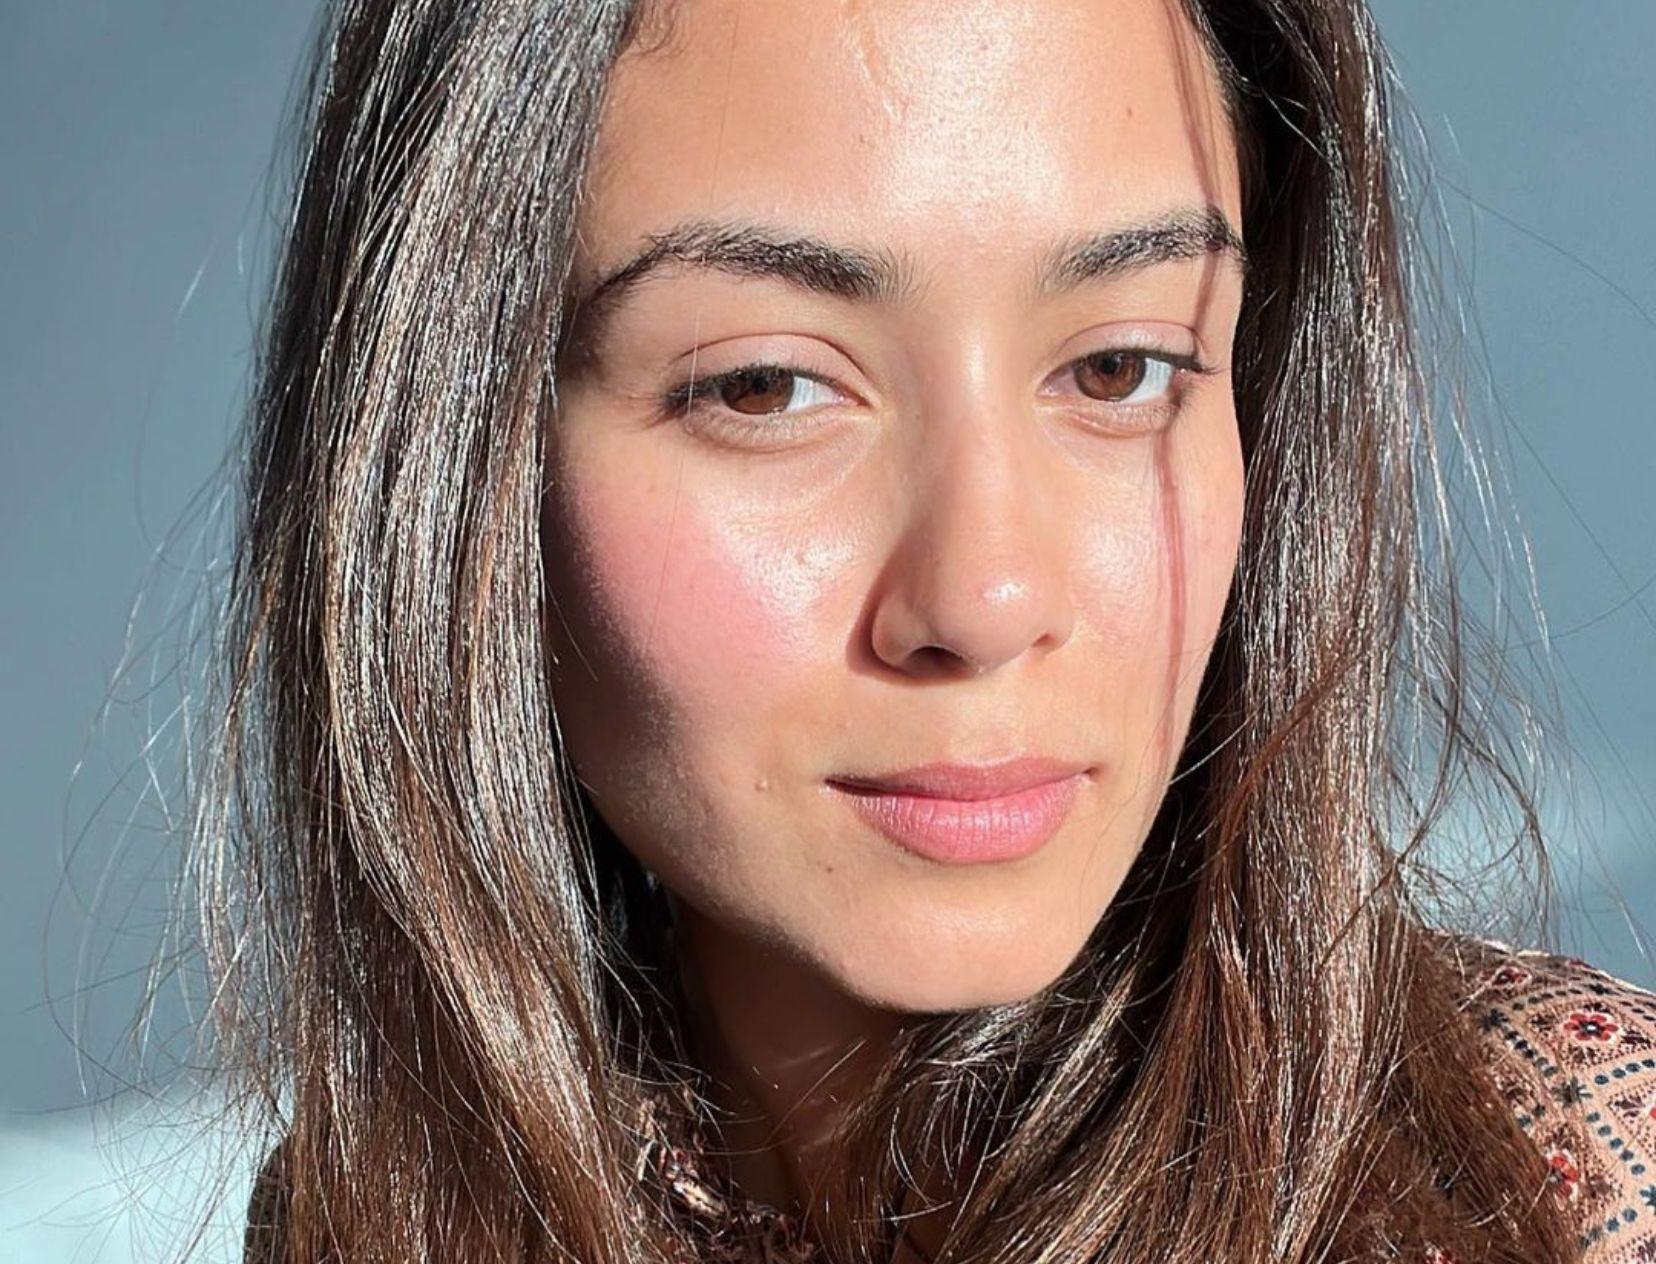 Did Mira Kapoor Really Do Her Own Facial Before Her Wedding?